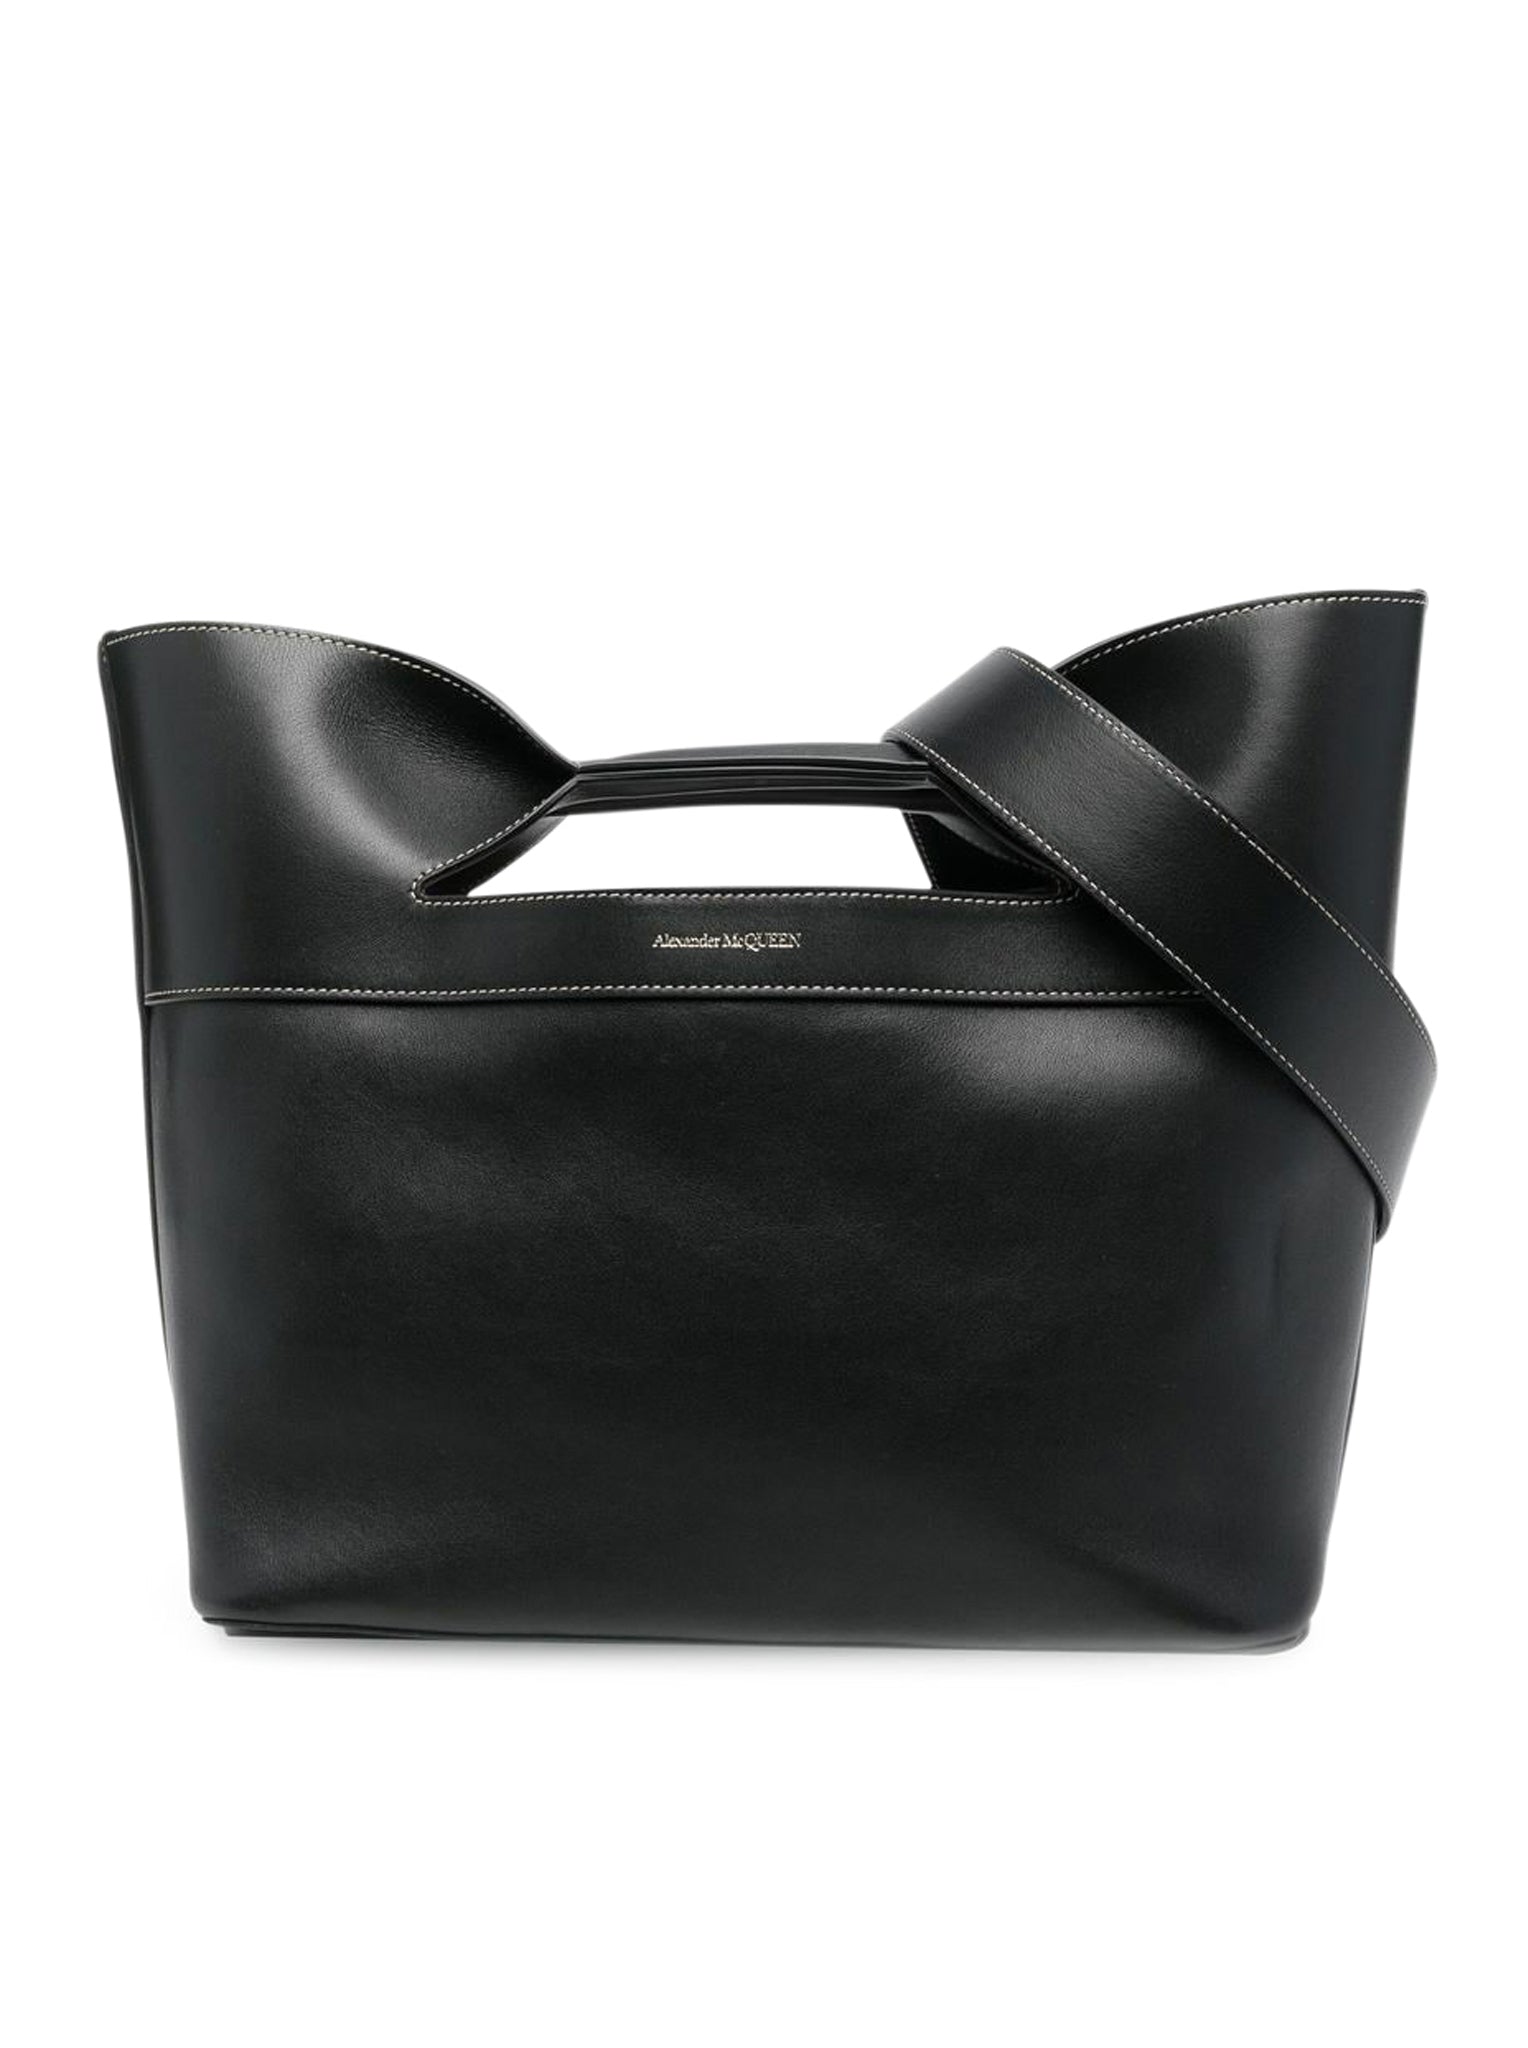 The Bow Small Bag for Women in Black